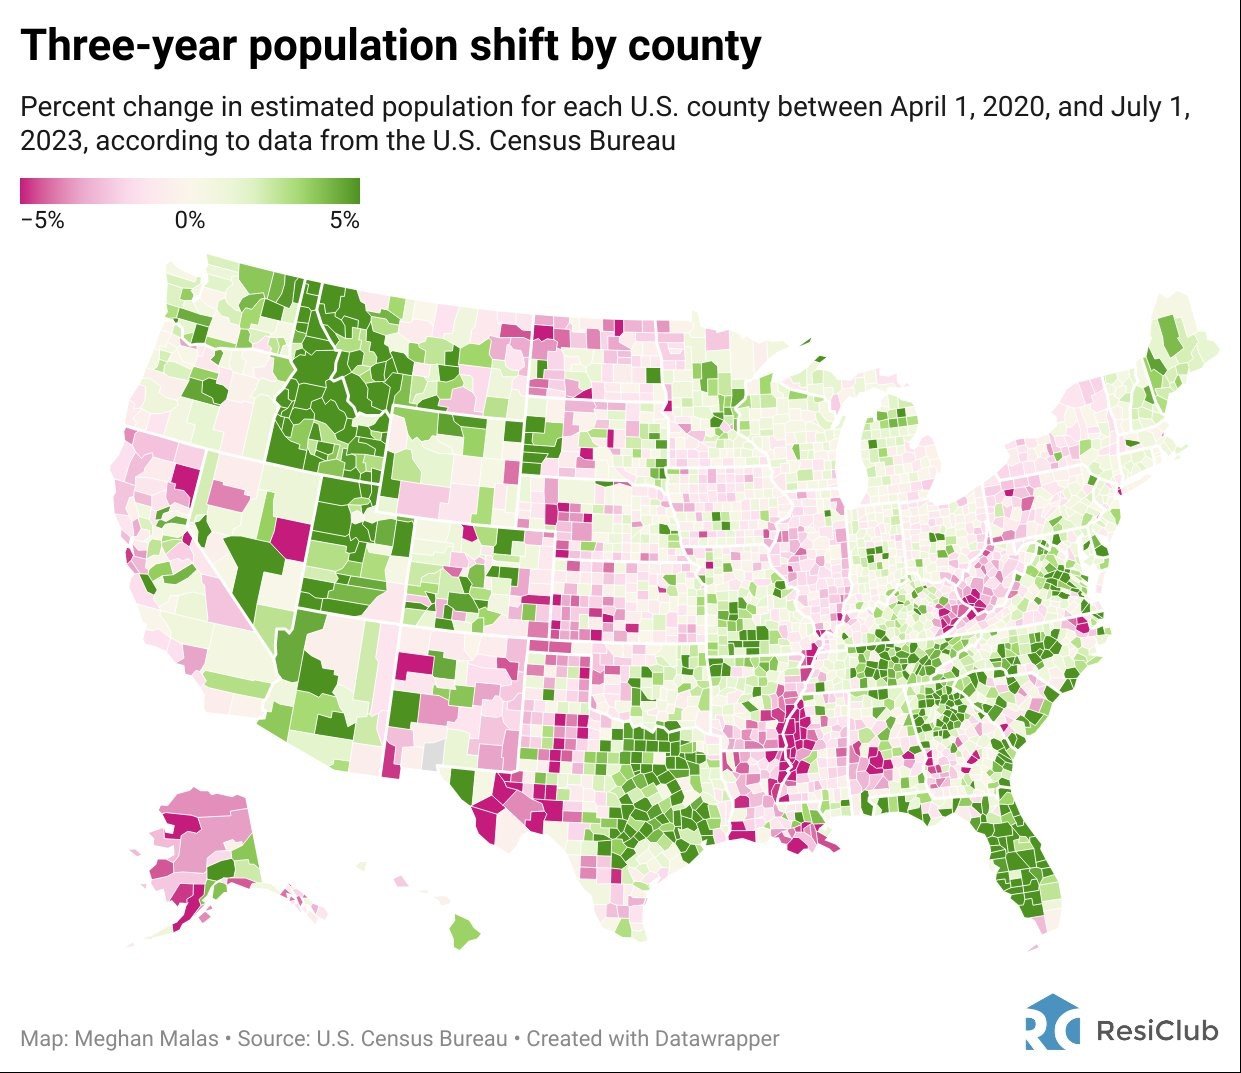 US map with county lines, pink means negative change and dark green is positive, most of Florida is dark green